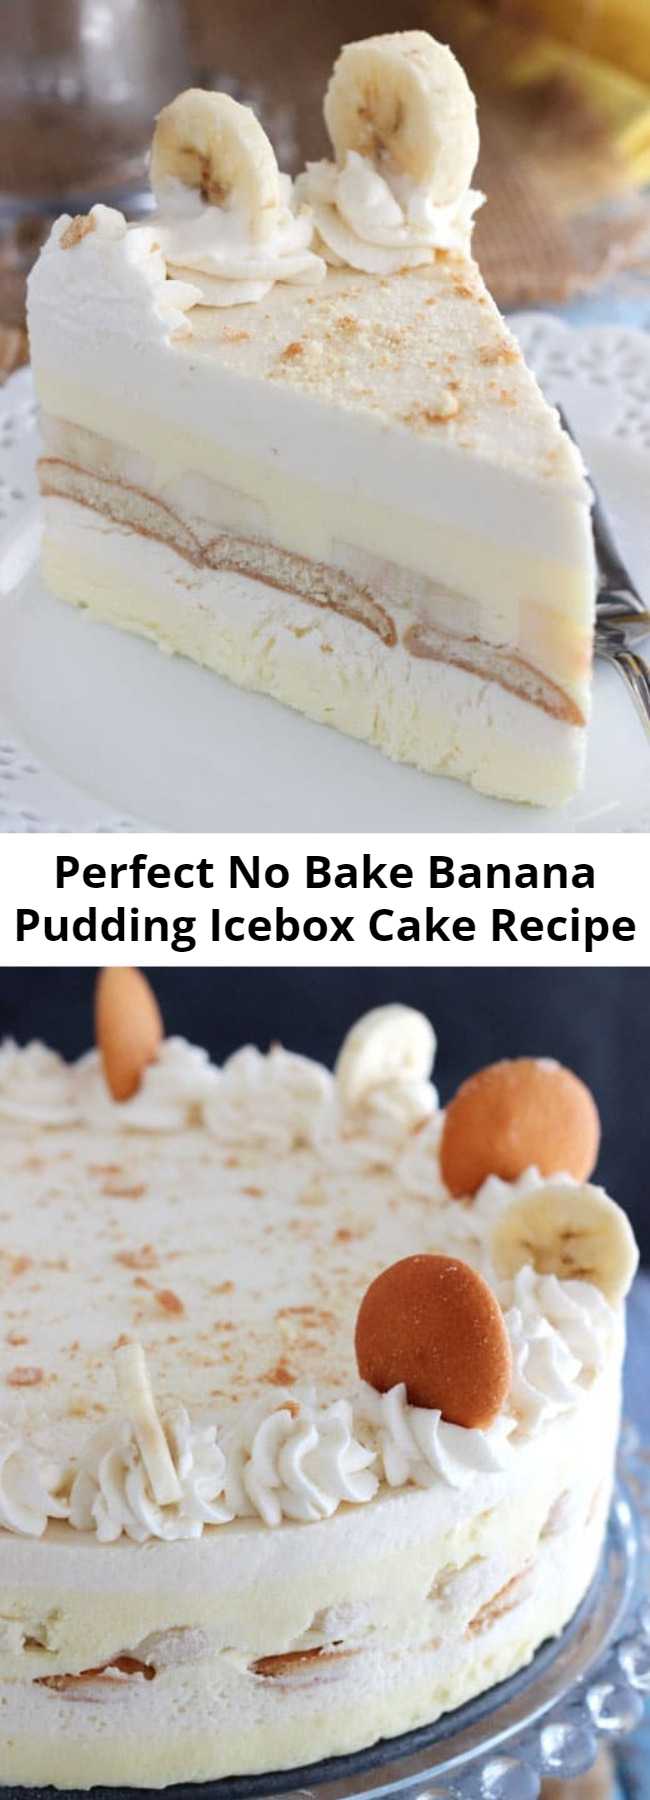 Perfect No Bake Banana Pudding Icebox Cake Recipe - This Banana Pudding Icebox Cake is the perfect no-bake dessert for summer. It’s a thicker, more fancy-looking version of banana pudding and it’s absolutely delicious!